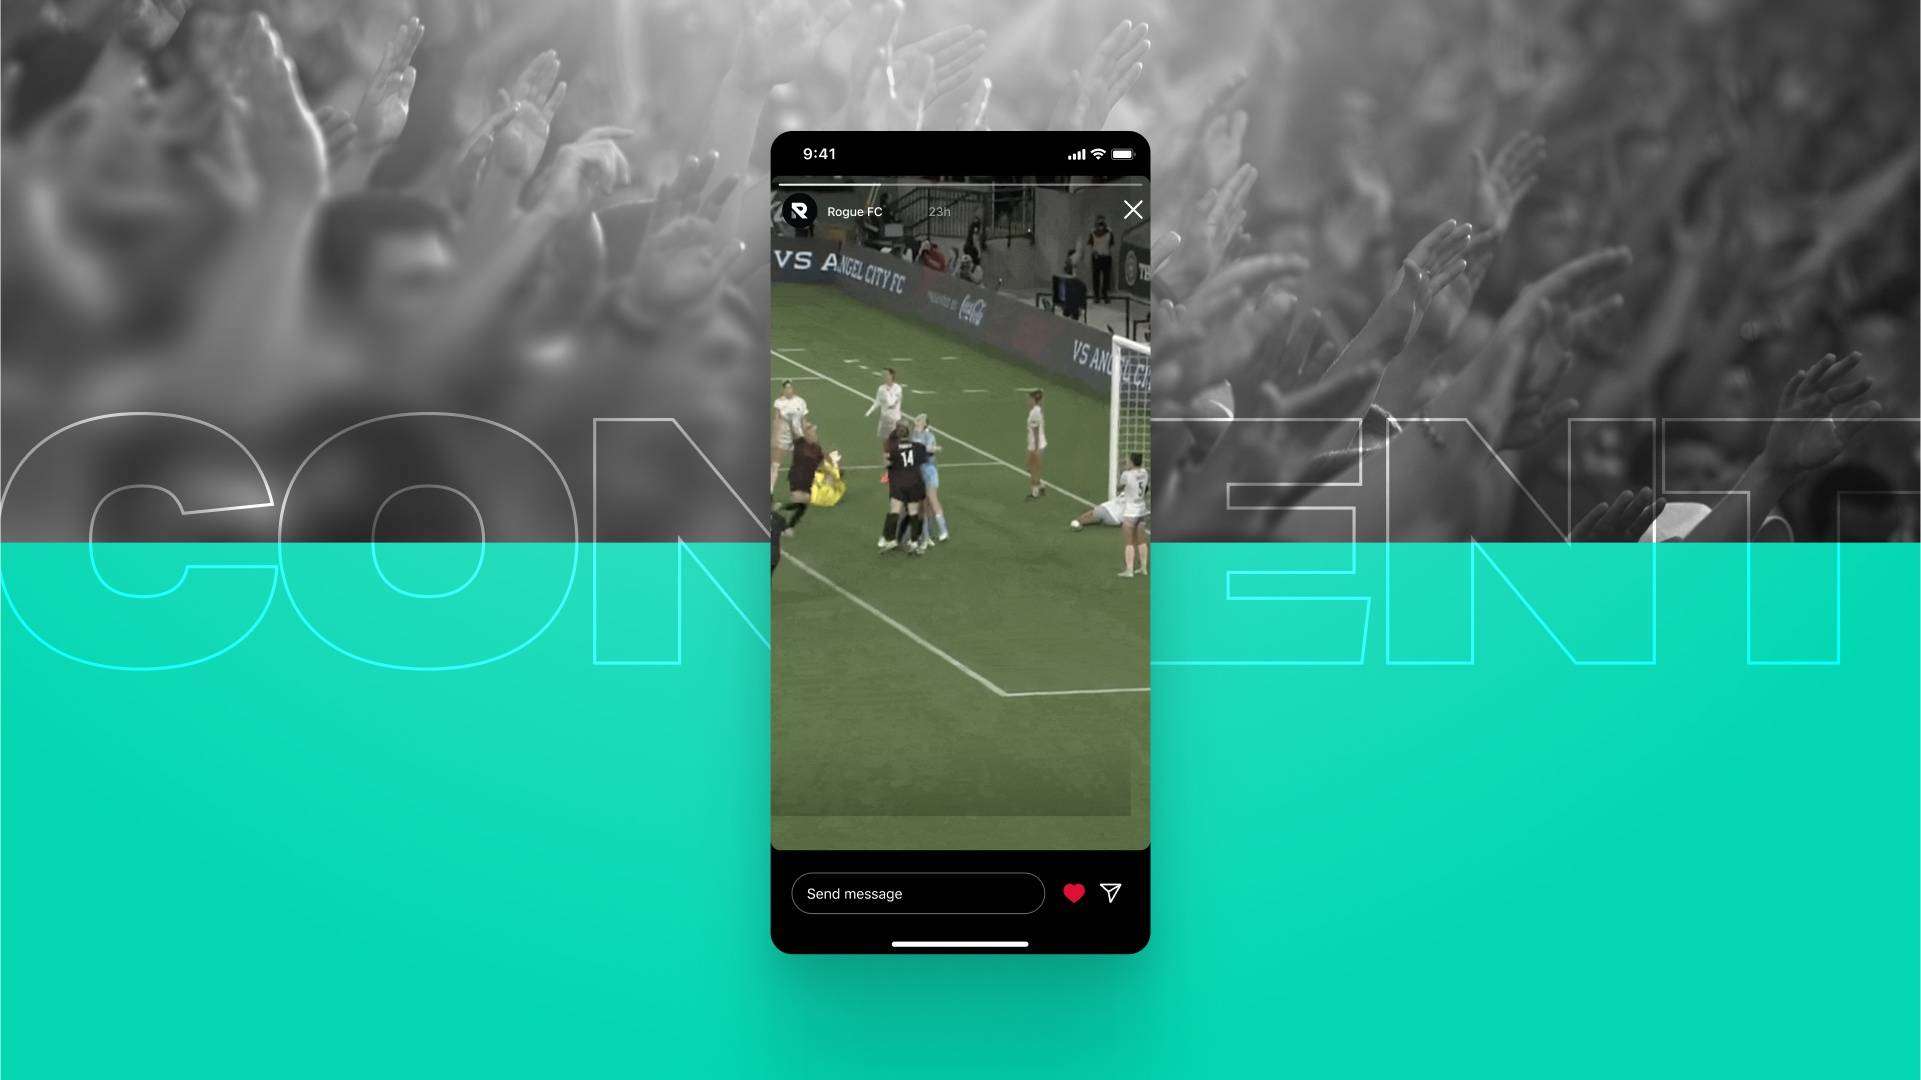 Instagram stories clip of women's soccer game to note short-form content as digital media currency, on green and black background poster with word content.